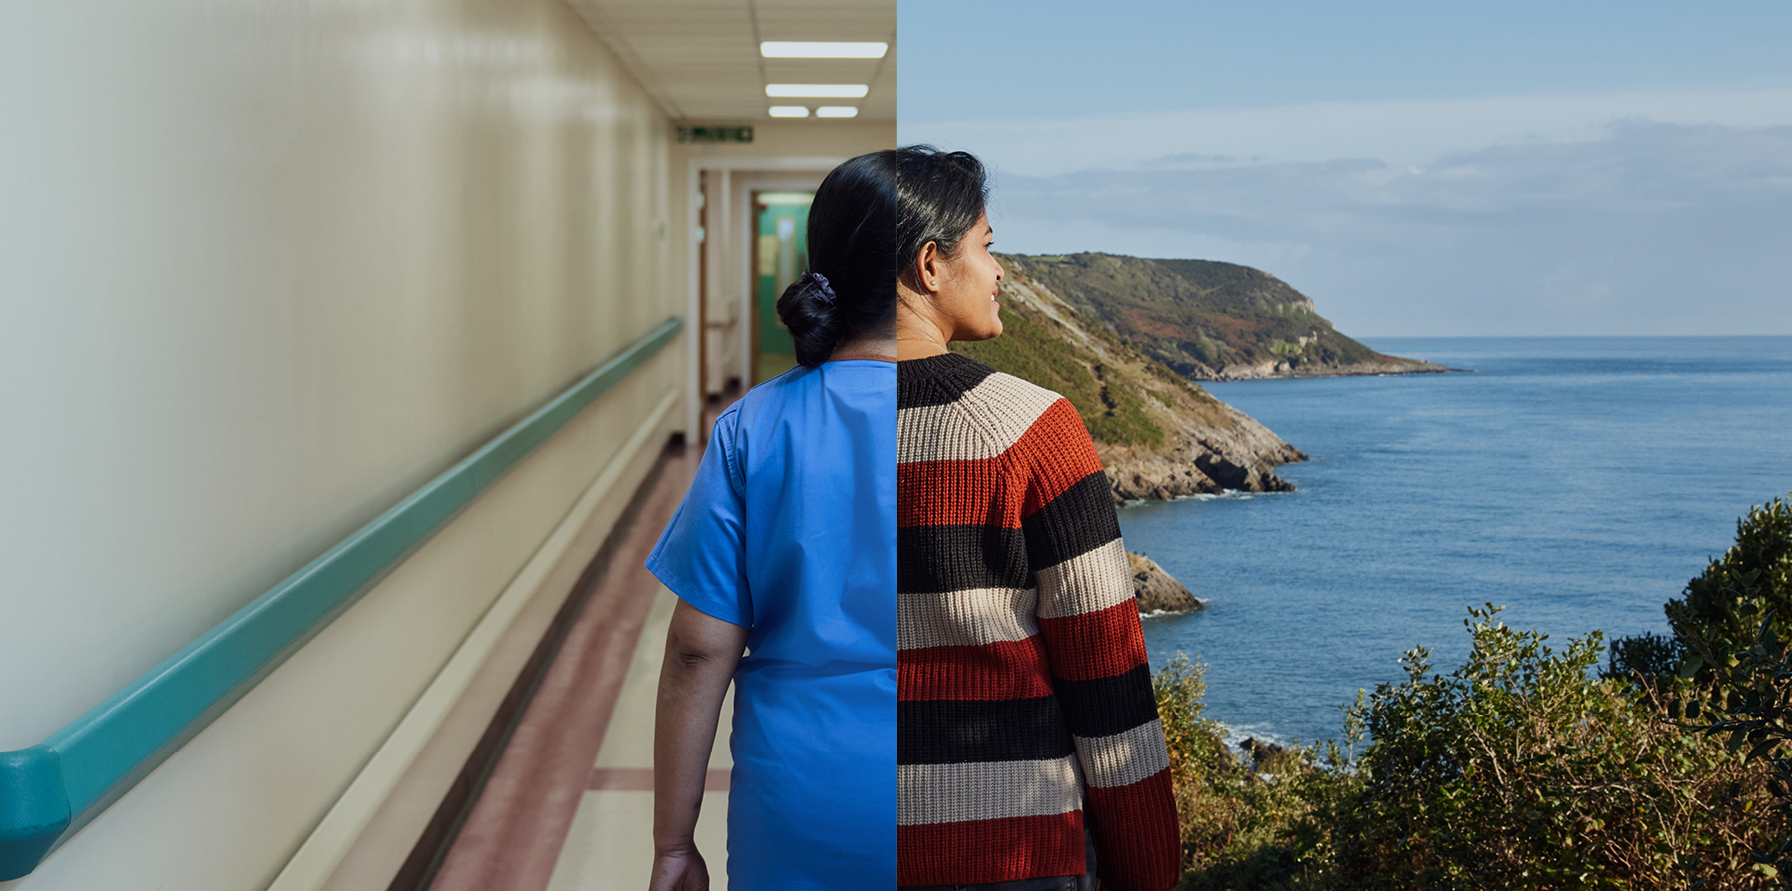 Split image, woman in a nurses uniform walking down a hospital corridor on the left, with the same woman on right looking out to ocean and hills